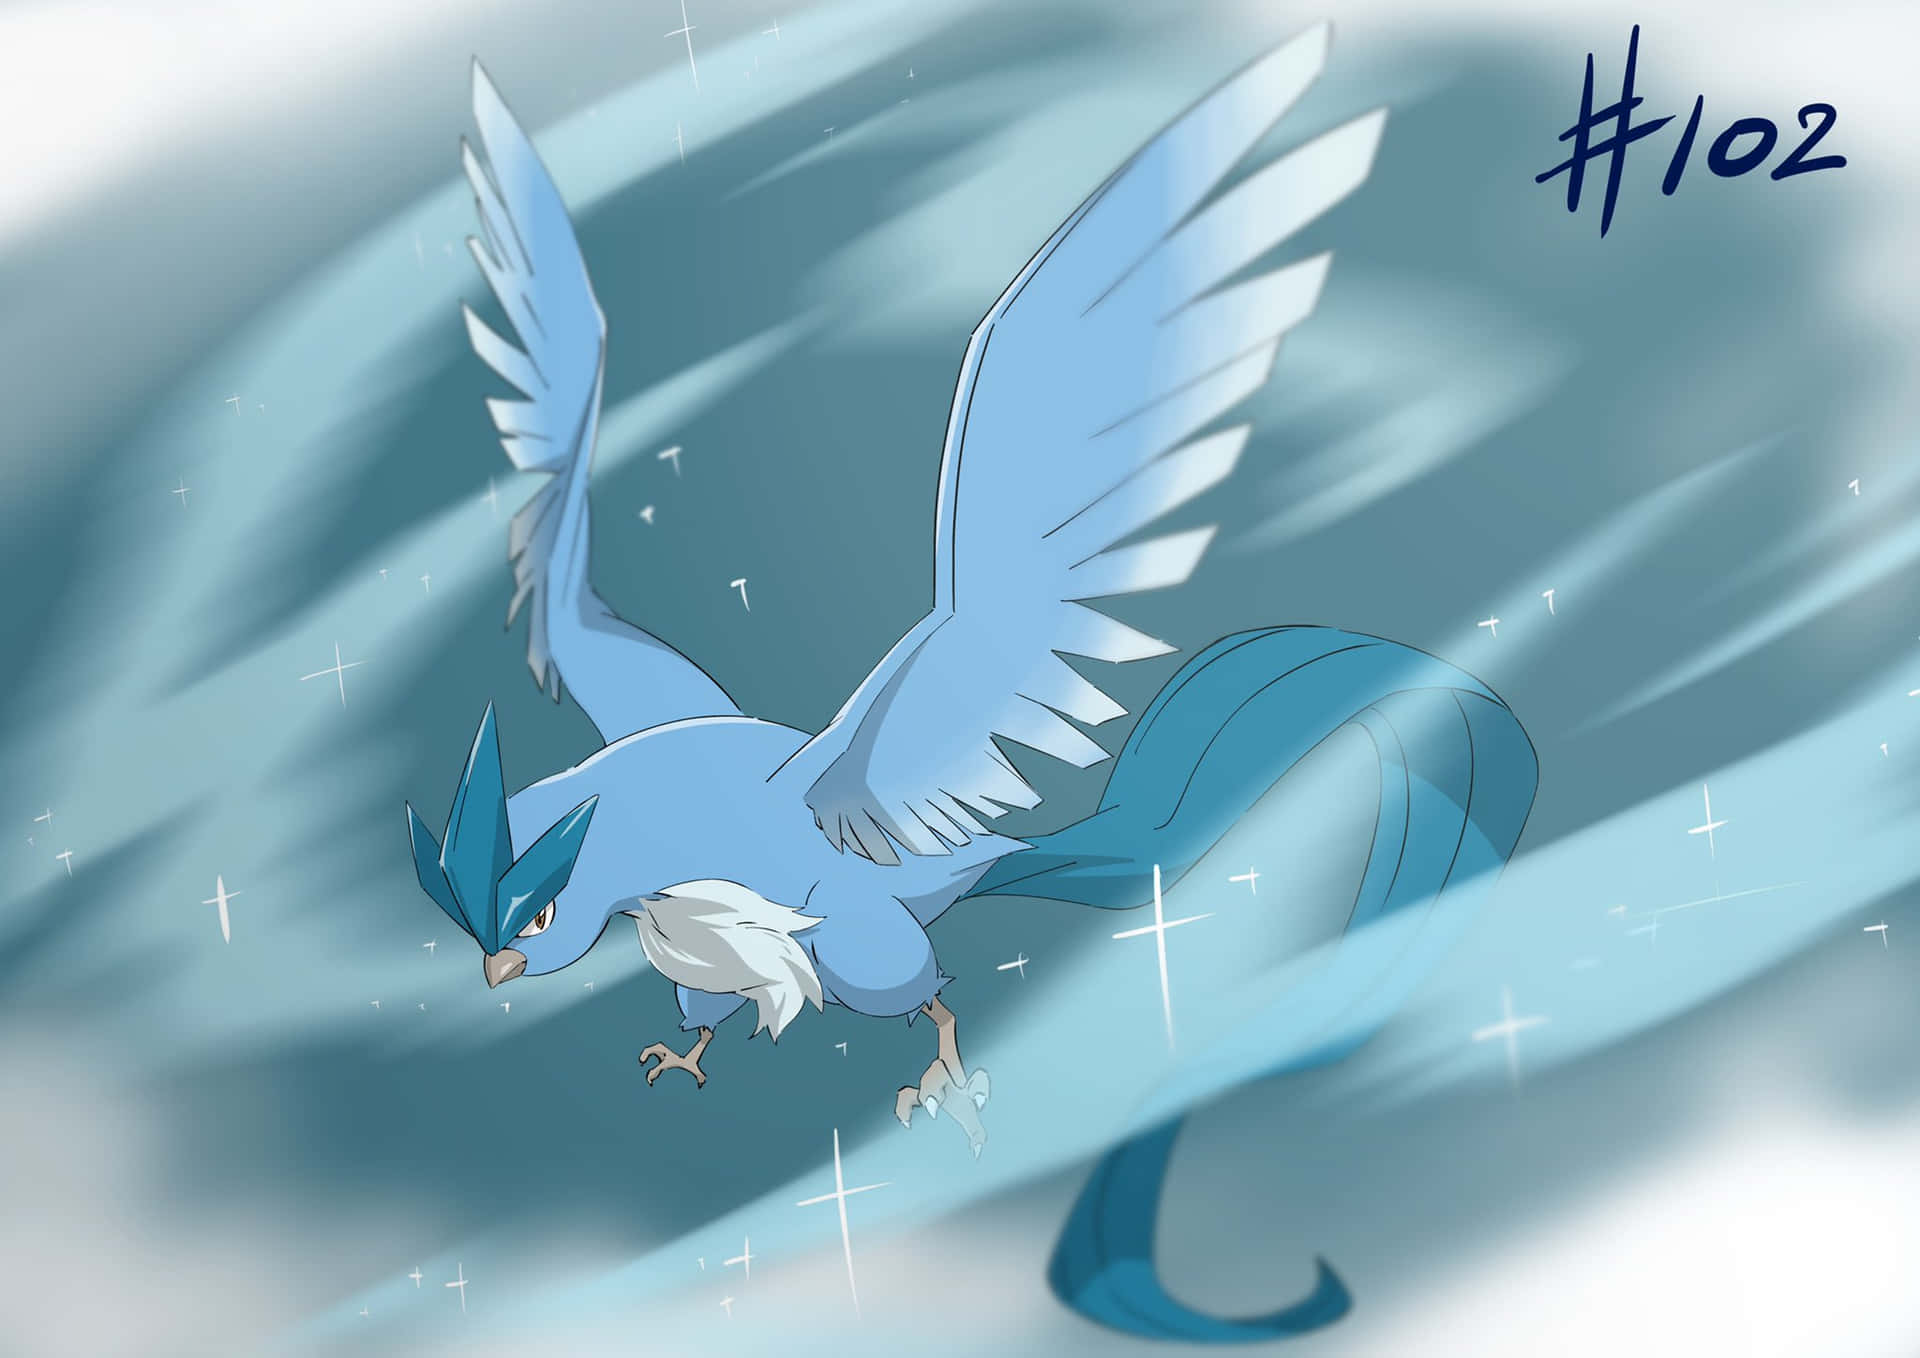 Articuno With #102 Text Wallpaper